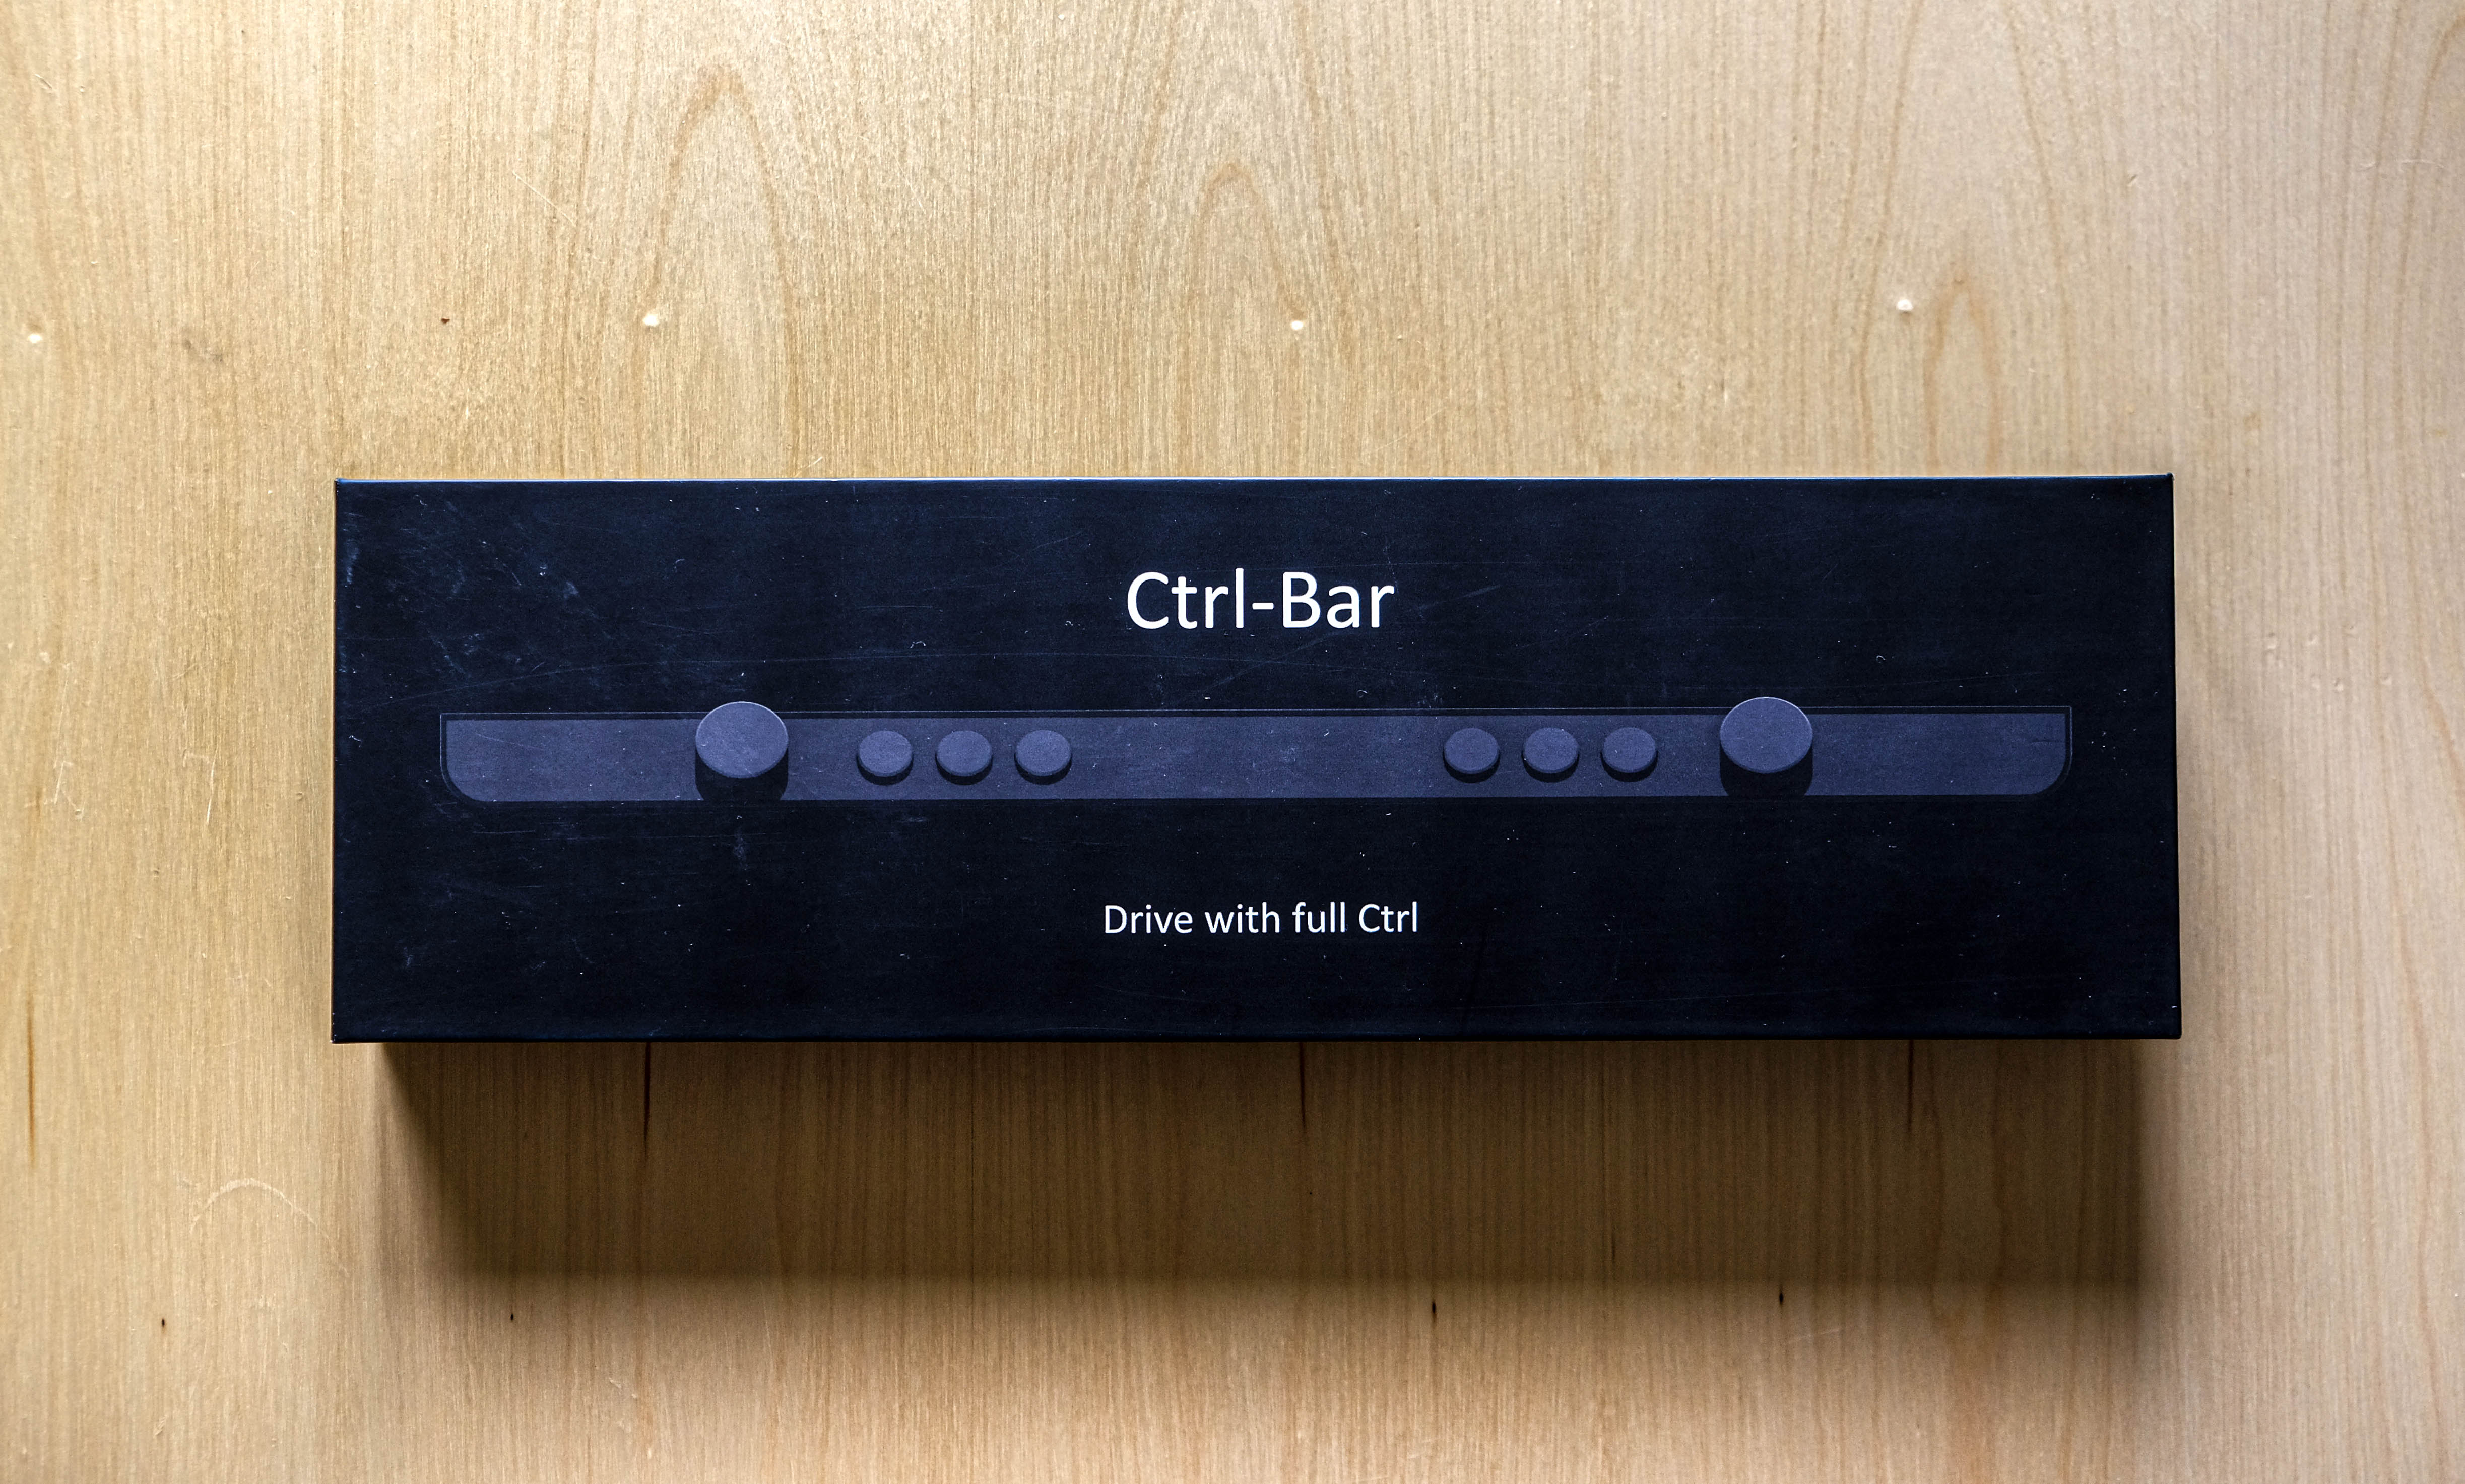 Unboxing the Ctrl-Bar: What you can expect to find in the box